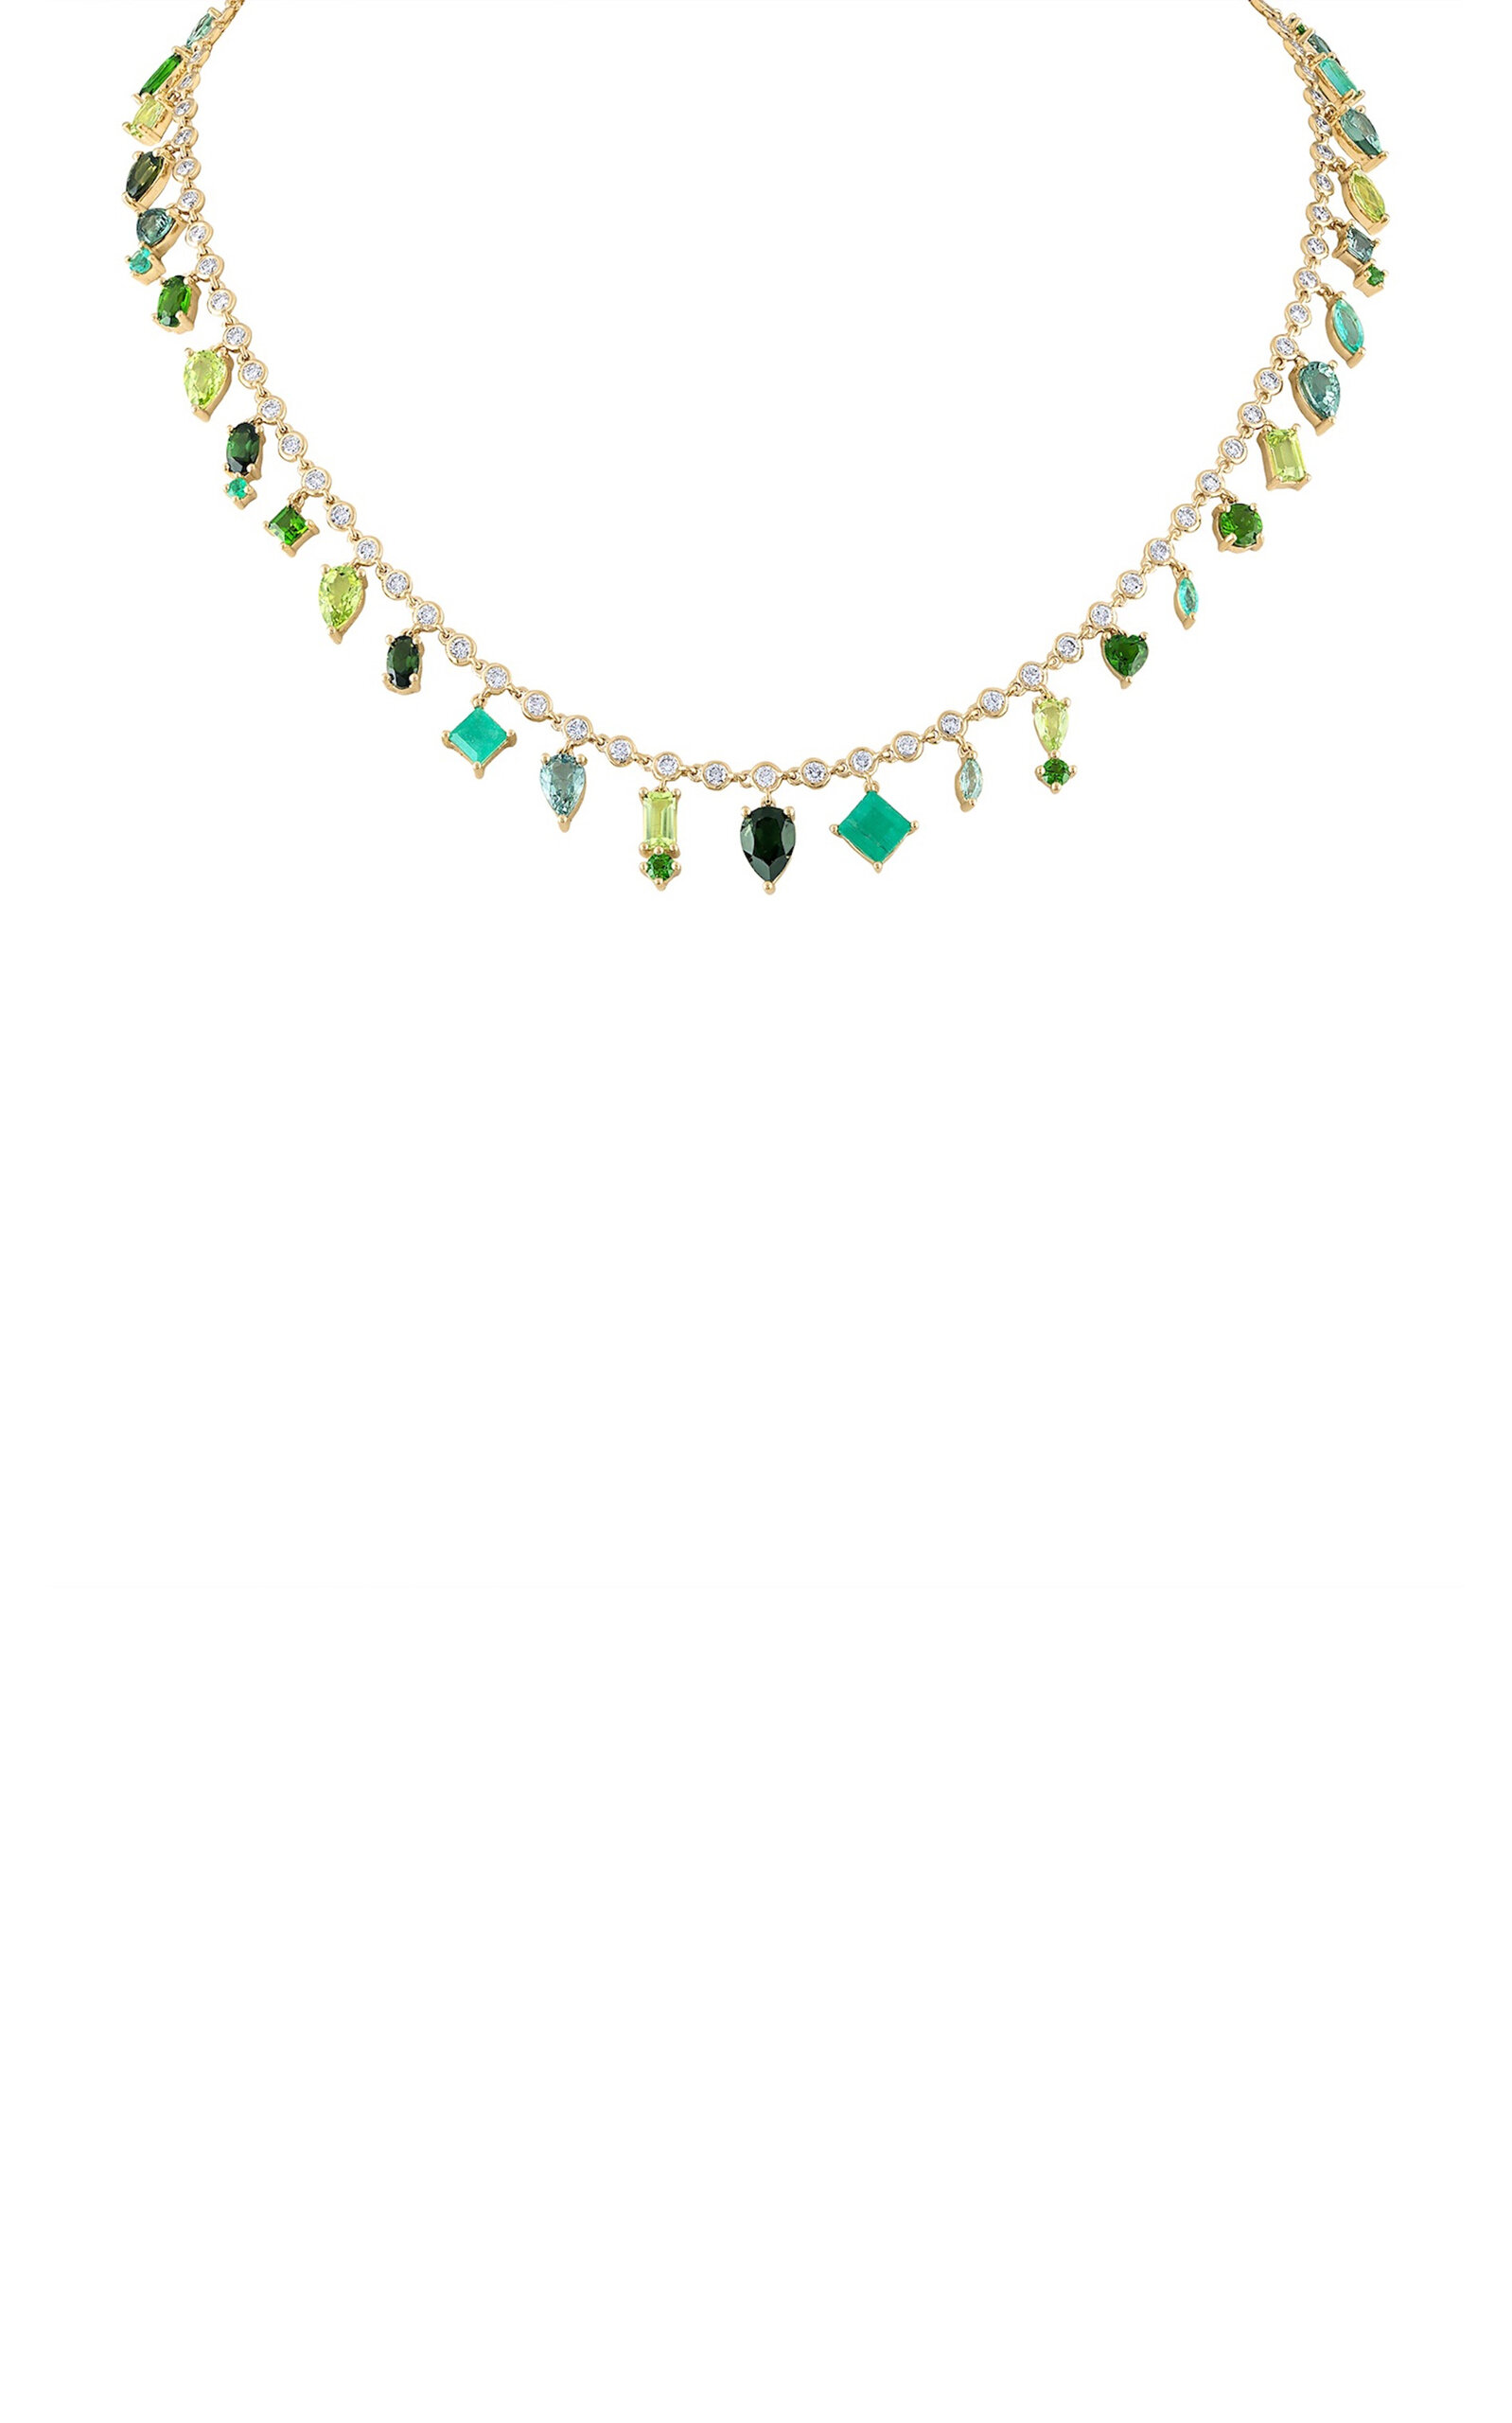 Shades of Green 14K Yellow Gold Necklace